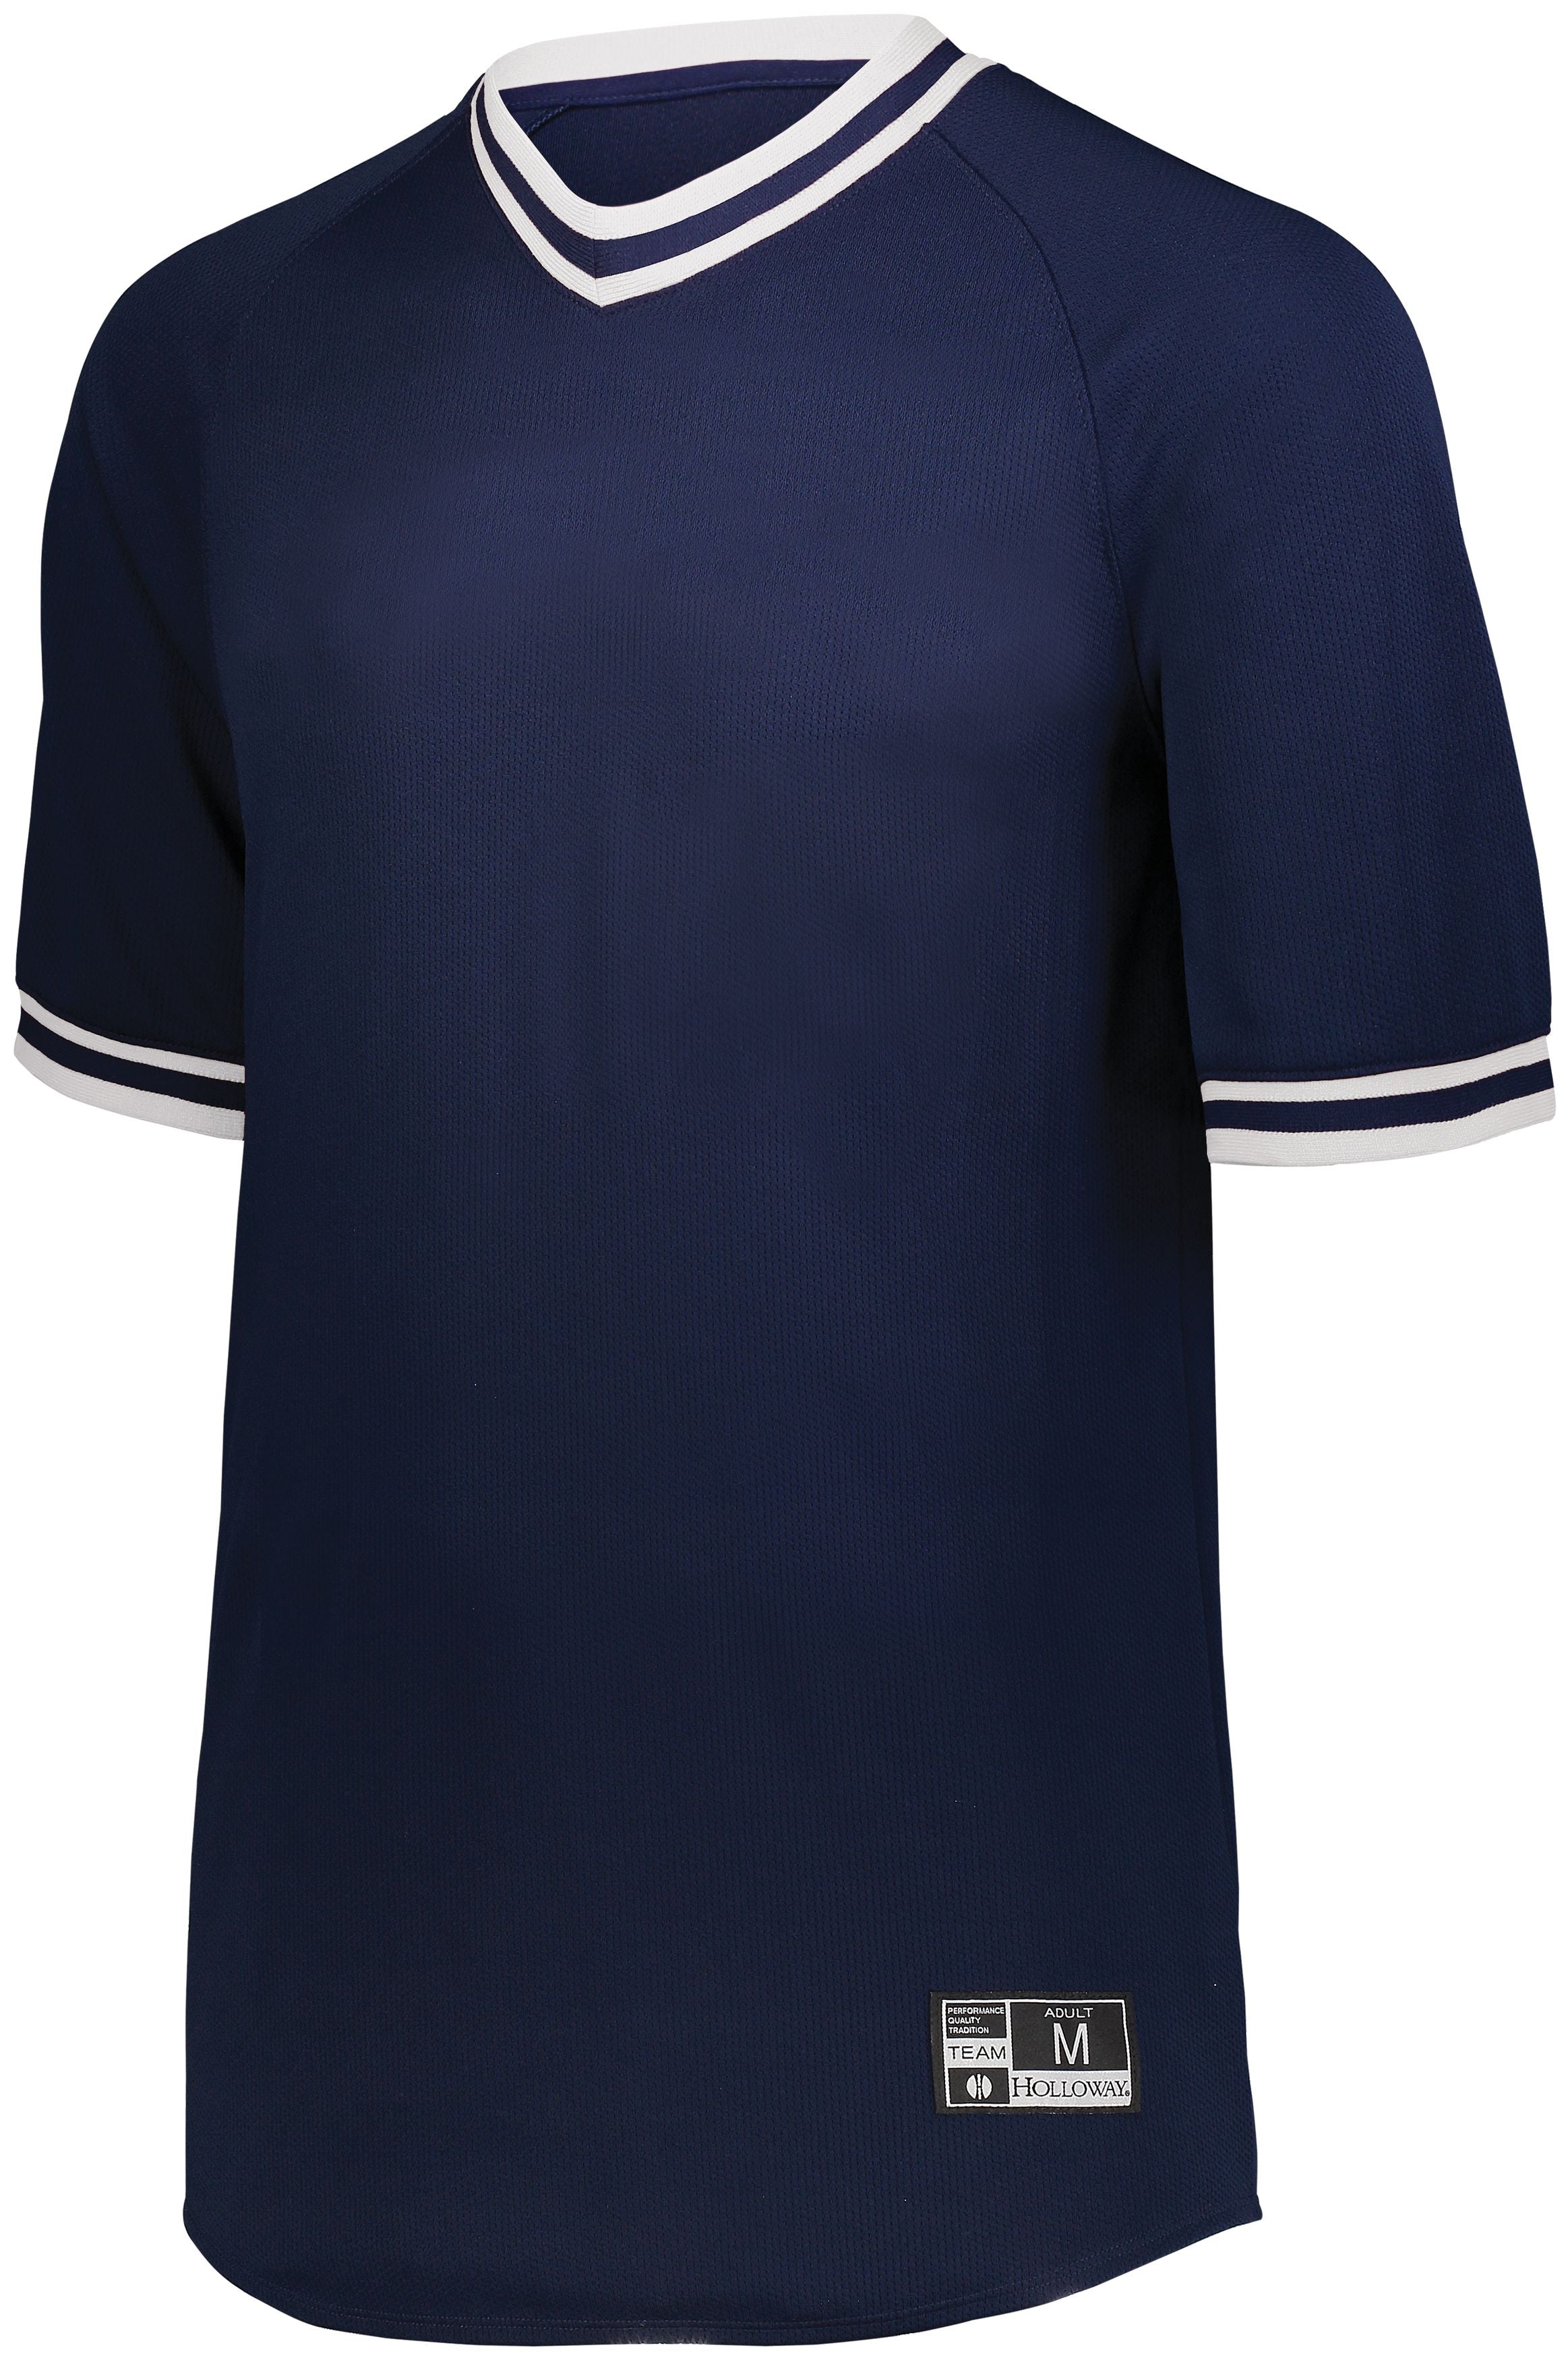 Holloway Retro V-Neck Baseball Jersey in Navy/White  -Part of the Adult, Adult-Jersey, Baseball, Holloway, Shirts, All-Sports, All-Sports-1 product lines at KanaleyCreations.com